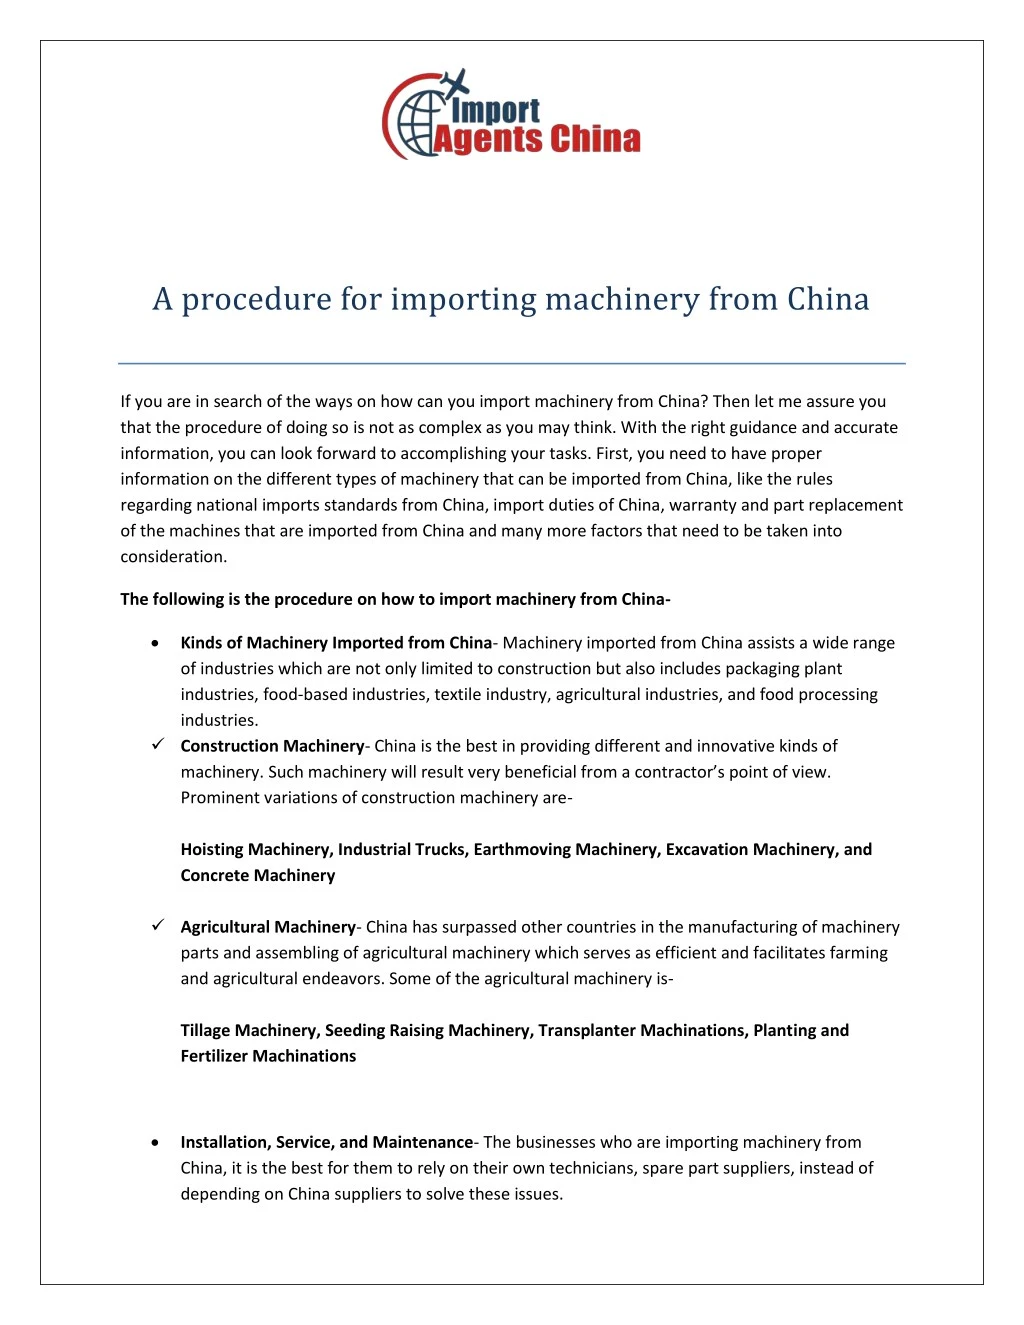 a procedure for importing machinery from china